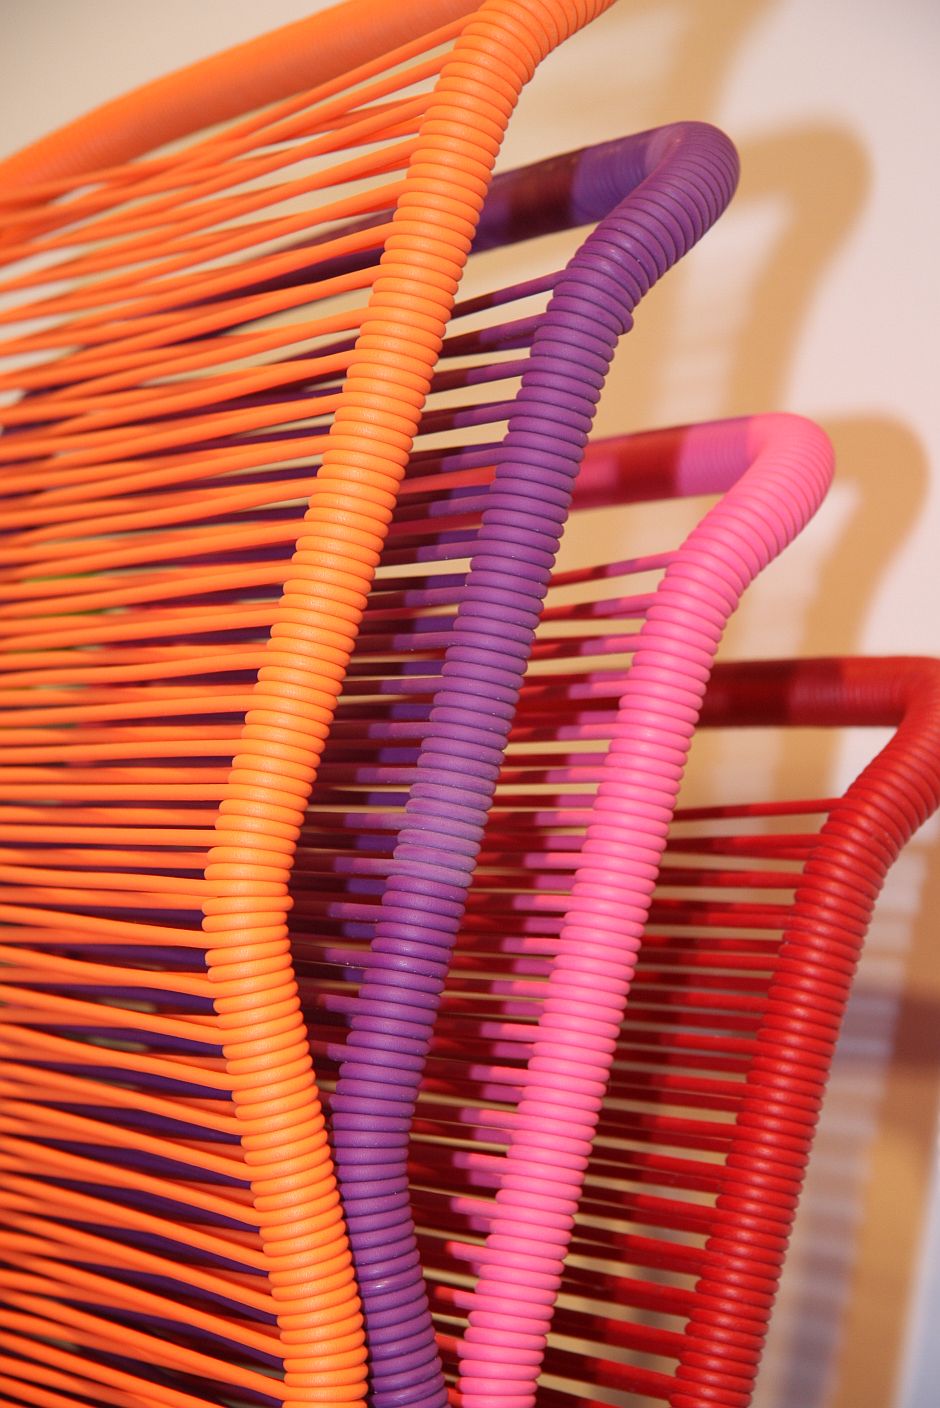 Tivoli Chair by Verner Panton through Montana: Colourful, but thats not why its good.